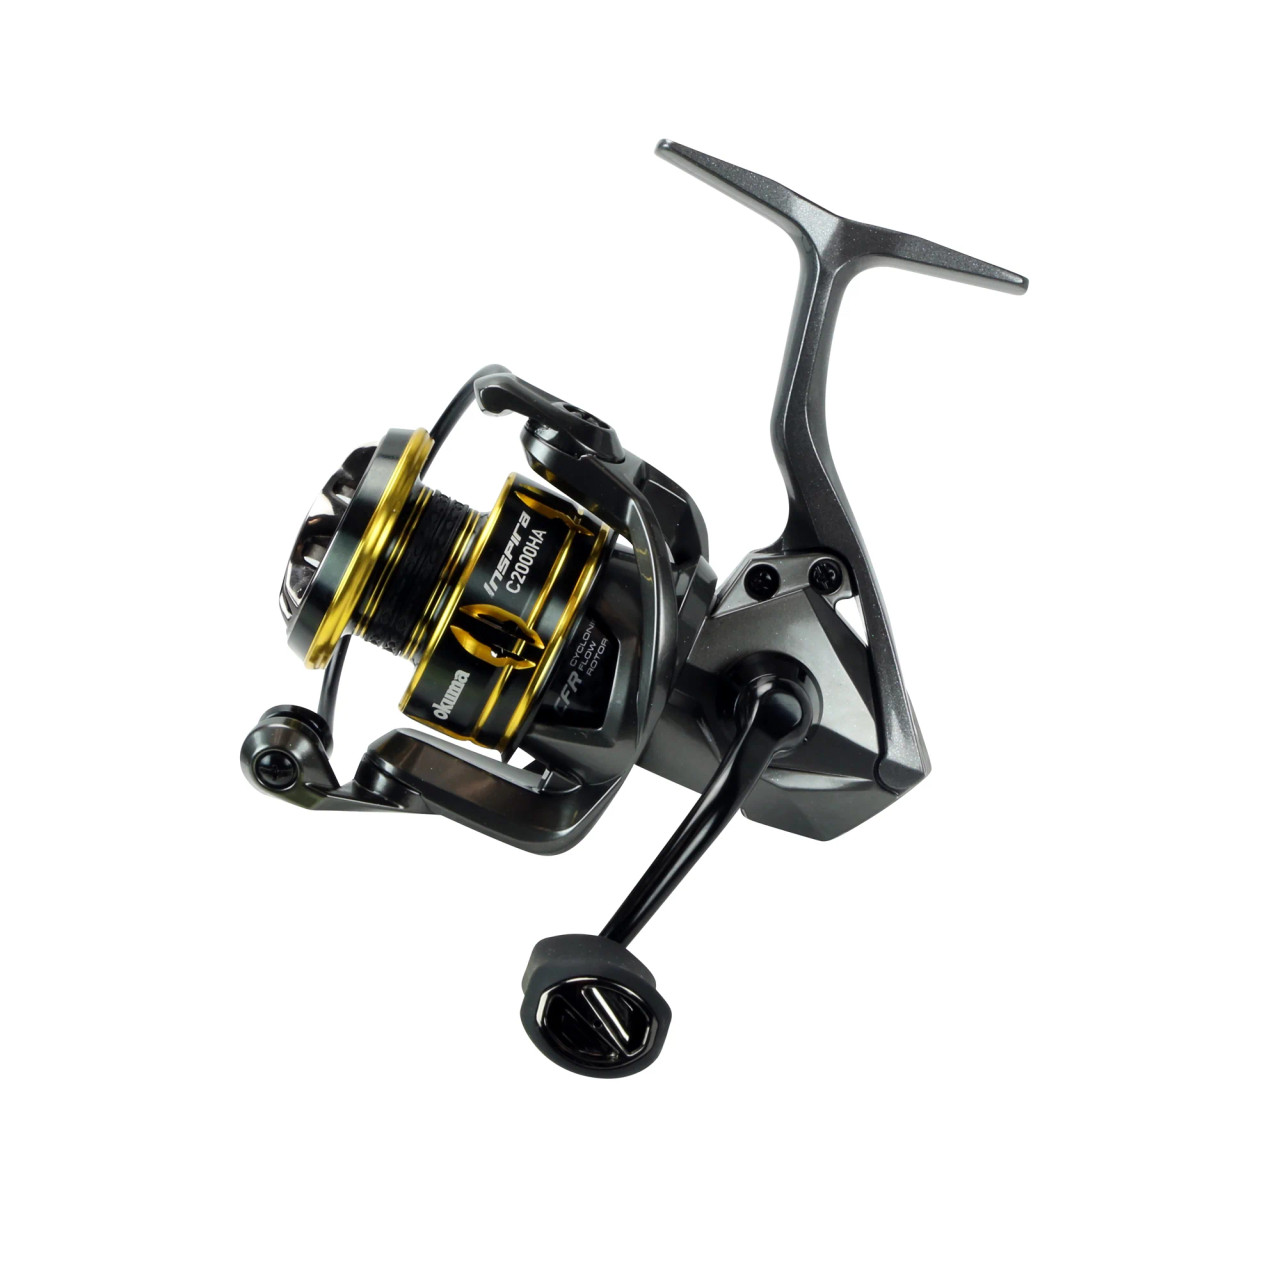 What makes a great spinning reel? On Okuma's Helios SX Spinning it's the  RESII: Computer Balanced Rotor Equalizing System that delivers consistent  line